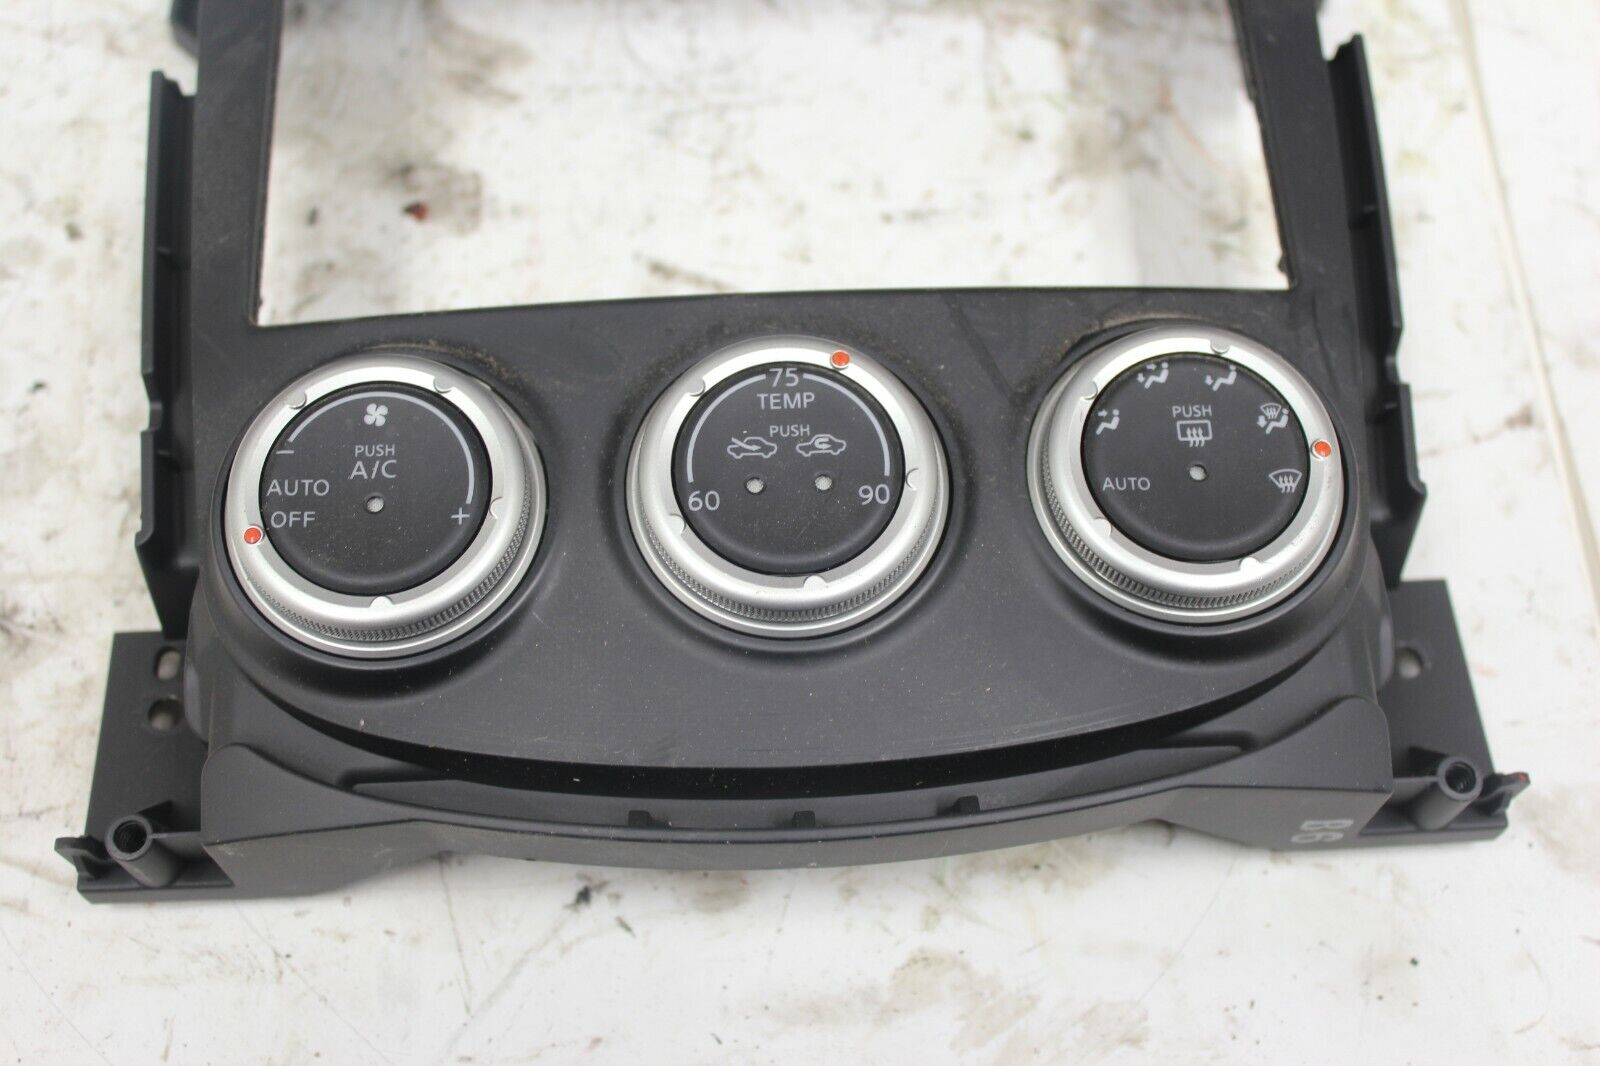 2018 NISSAN 370Z COUPE DASH AC HEATER CLIMATE CONTROL SWITCH TRIM OEM